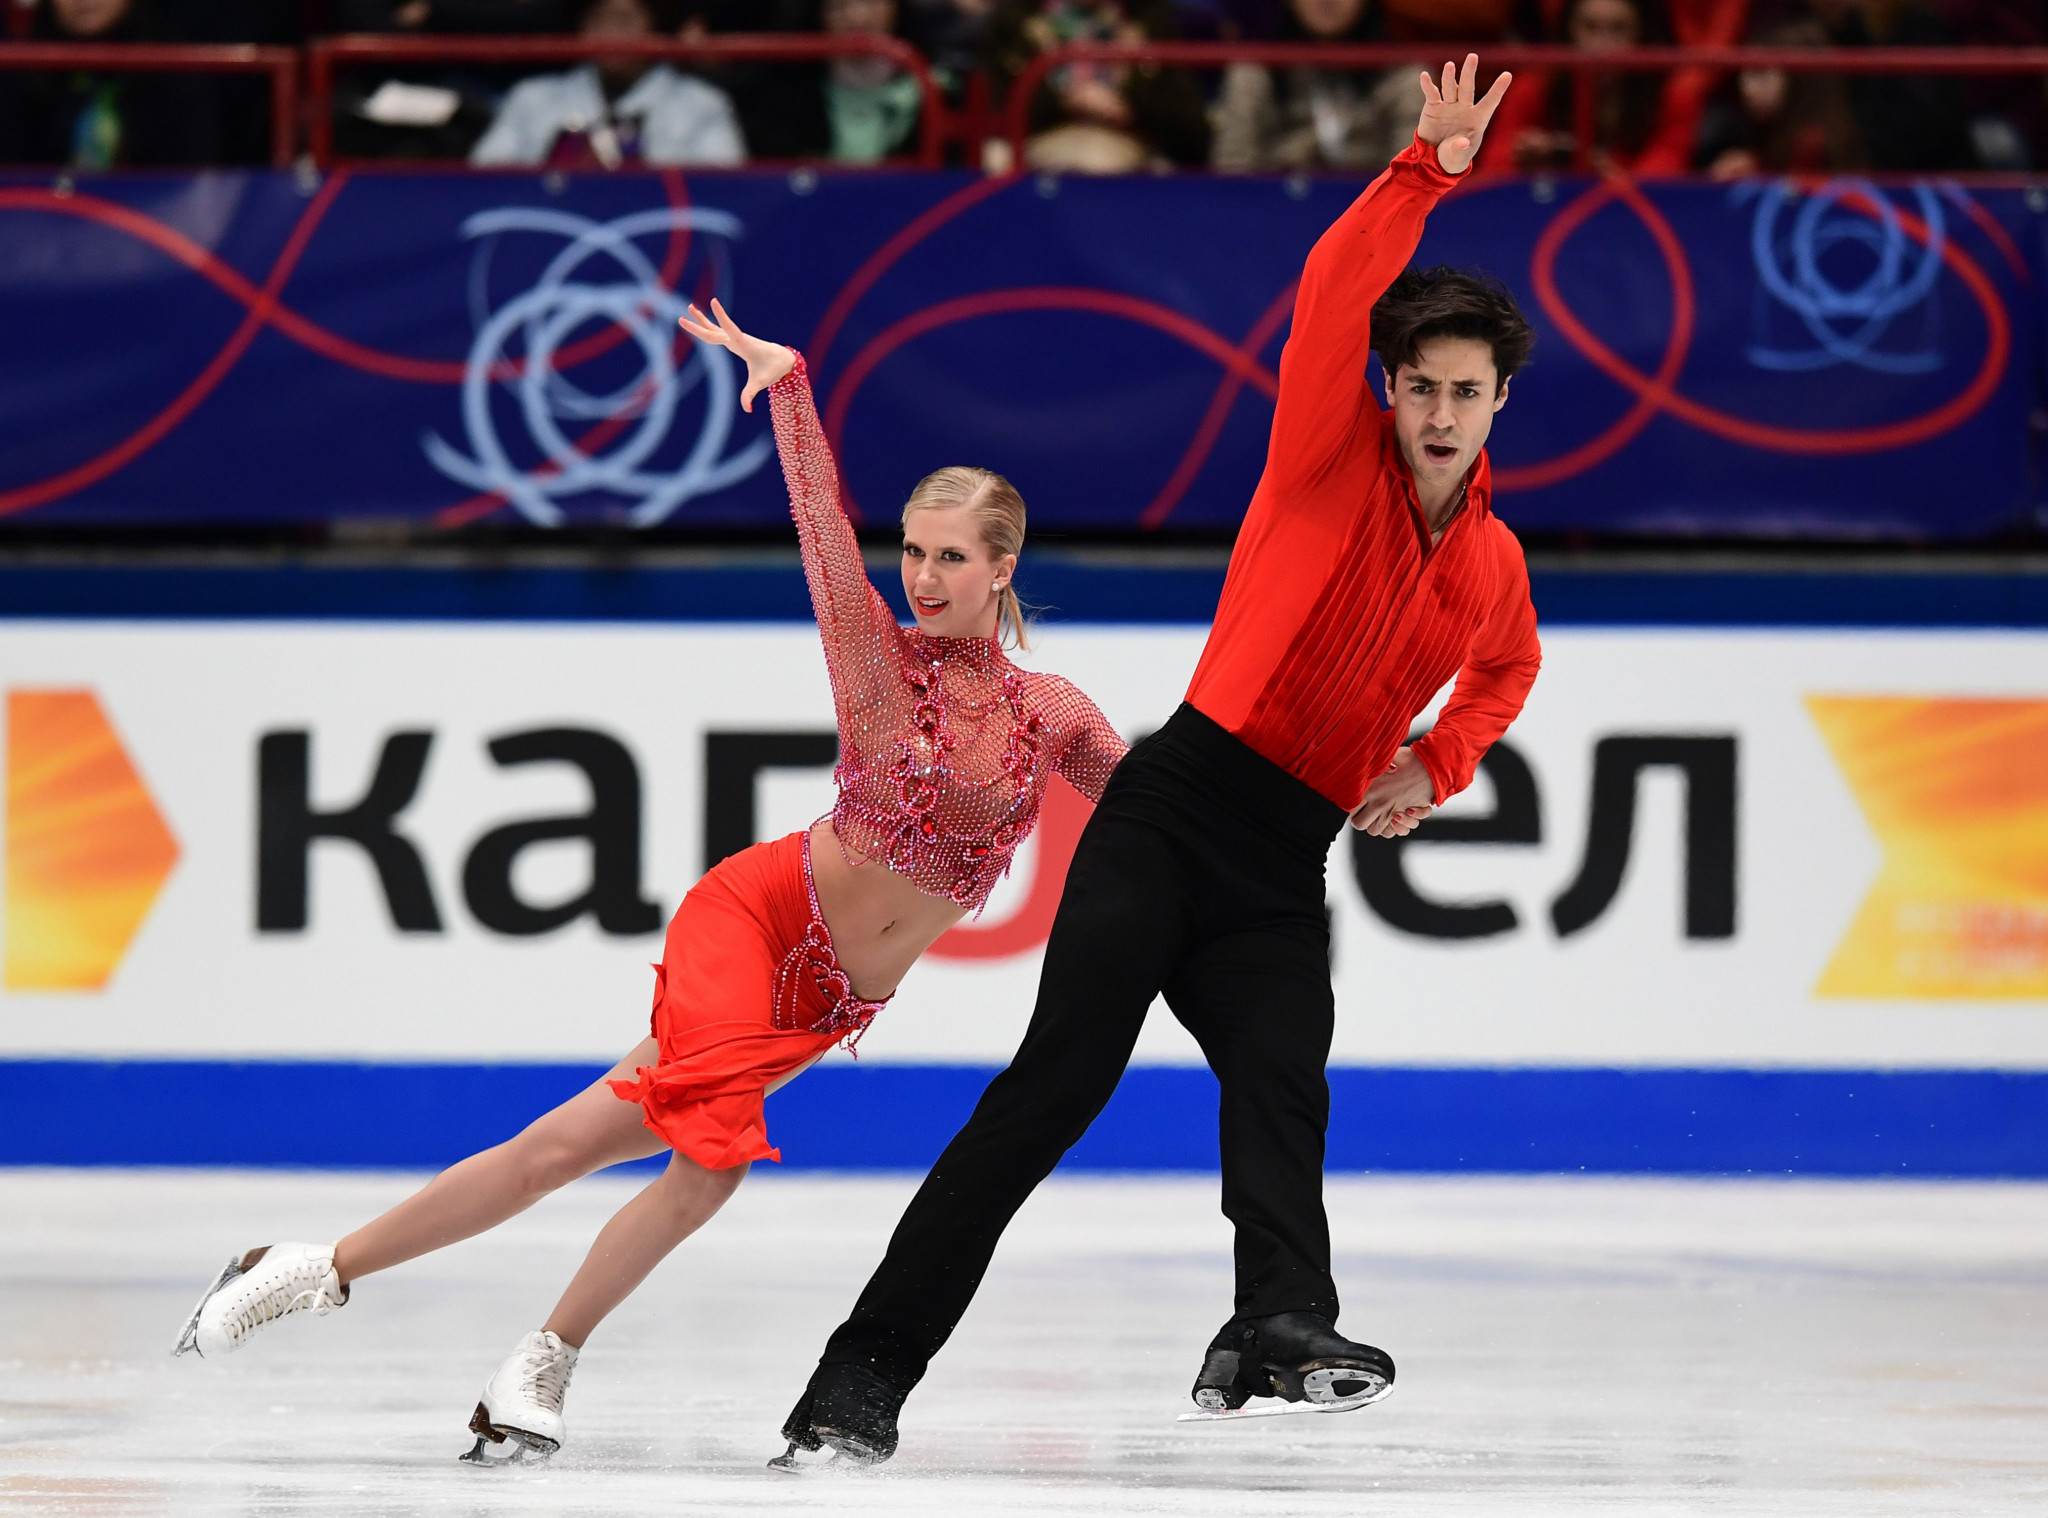 Andrew Poje and Kaitlyn Weaver won World Championship bronze in Milan in March ©Getty Images